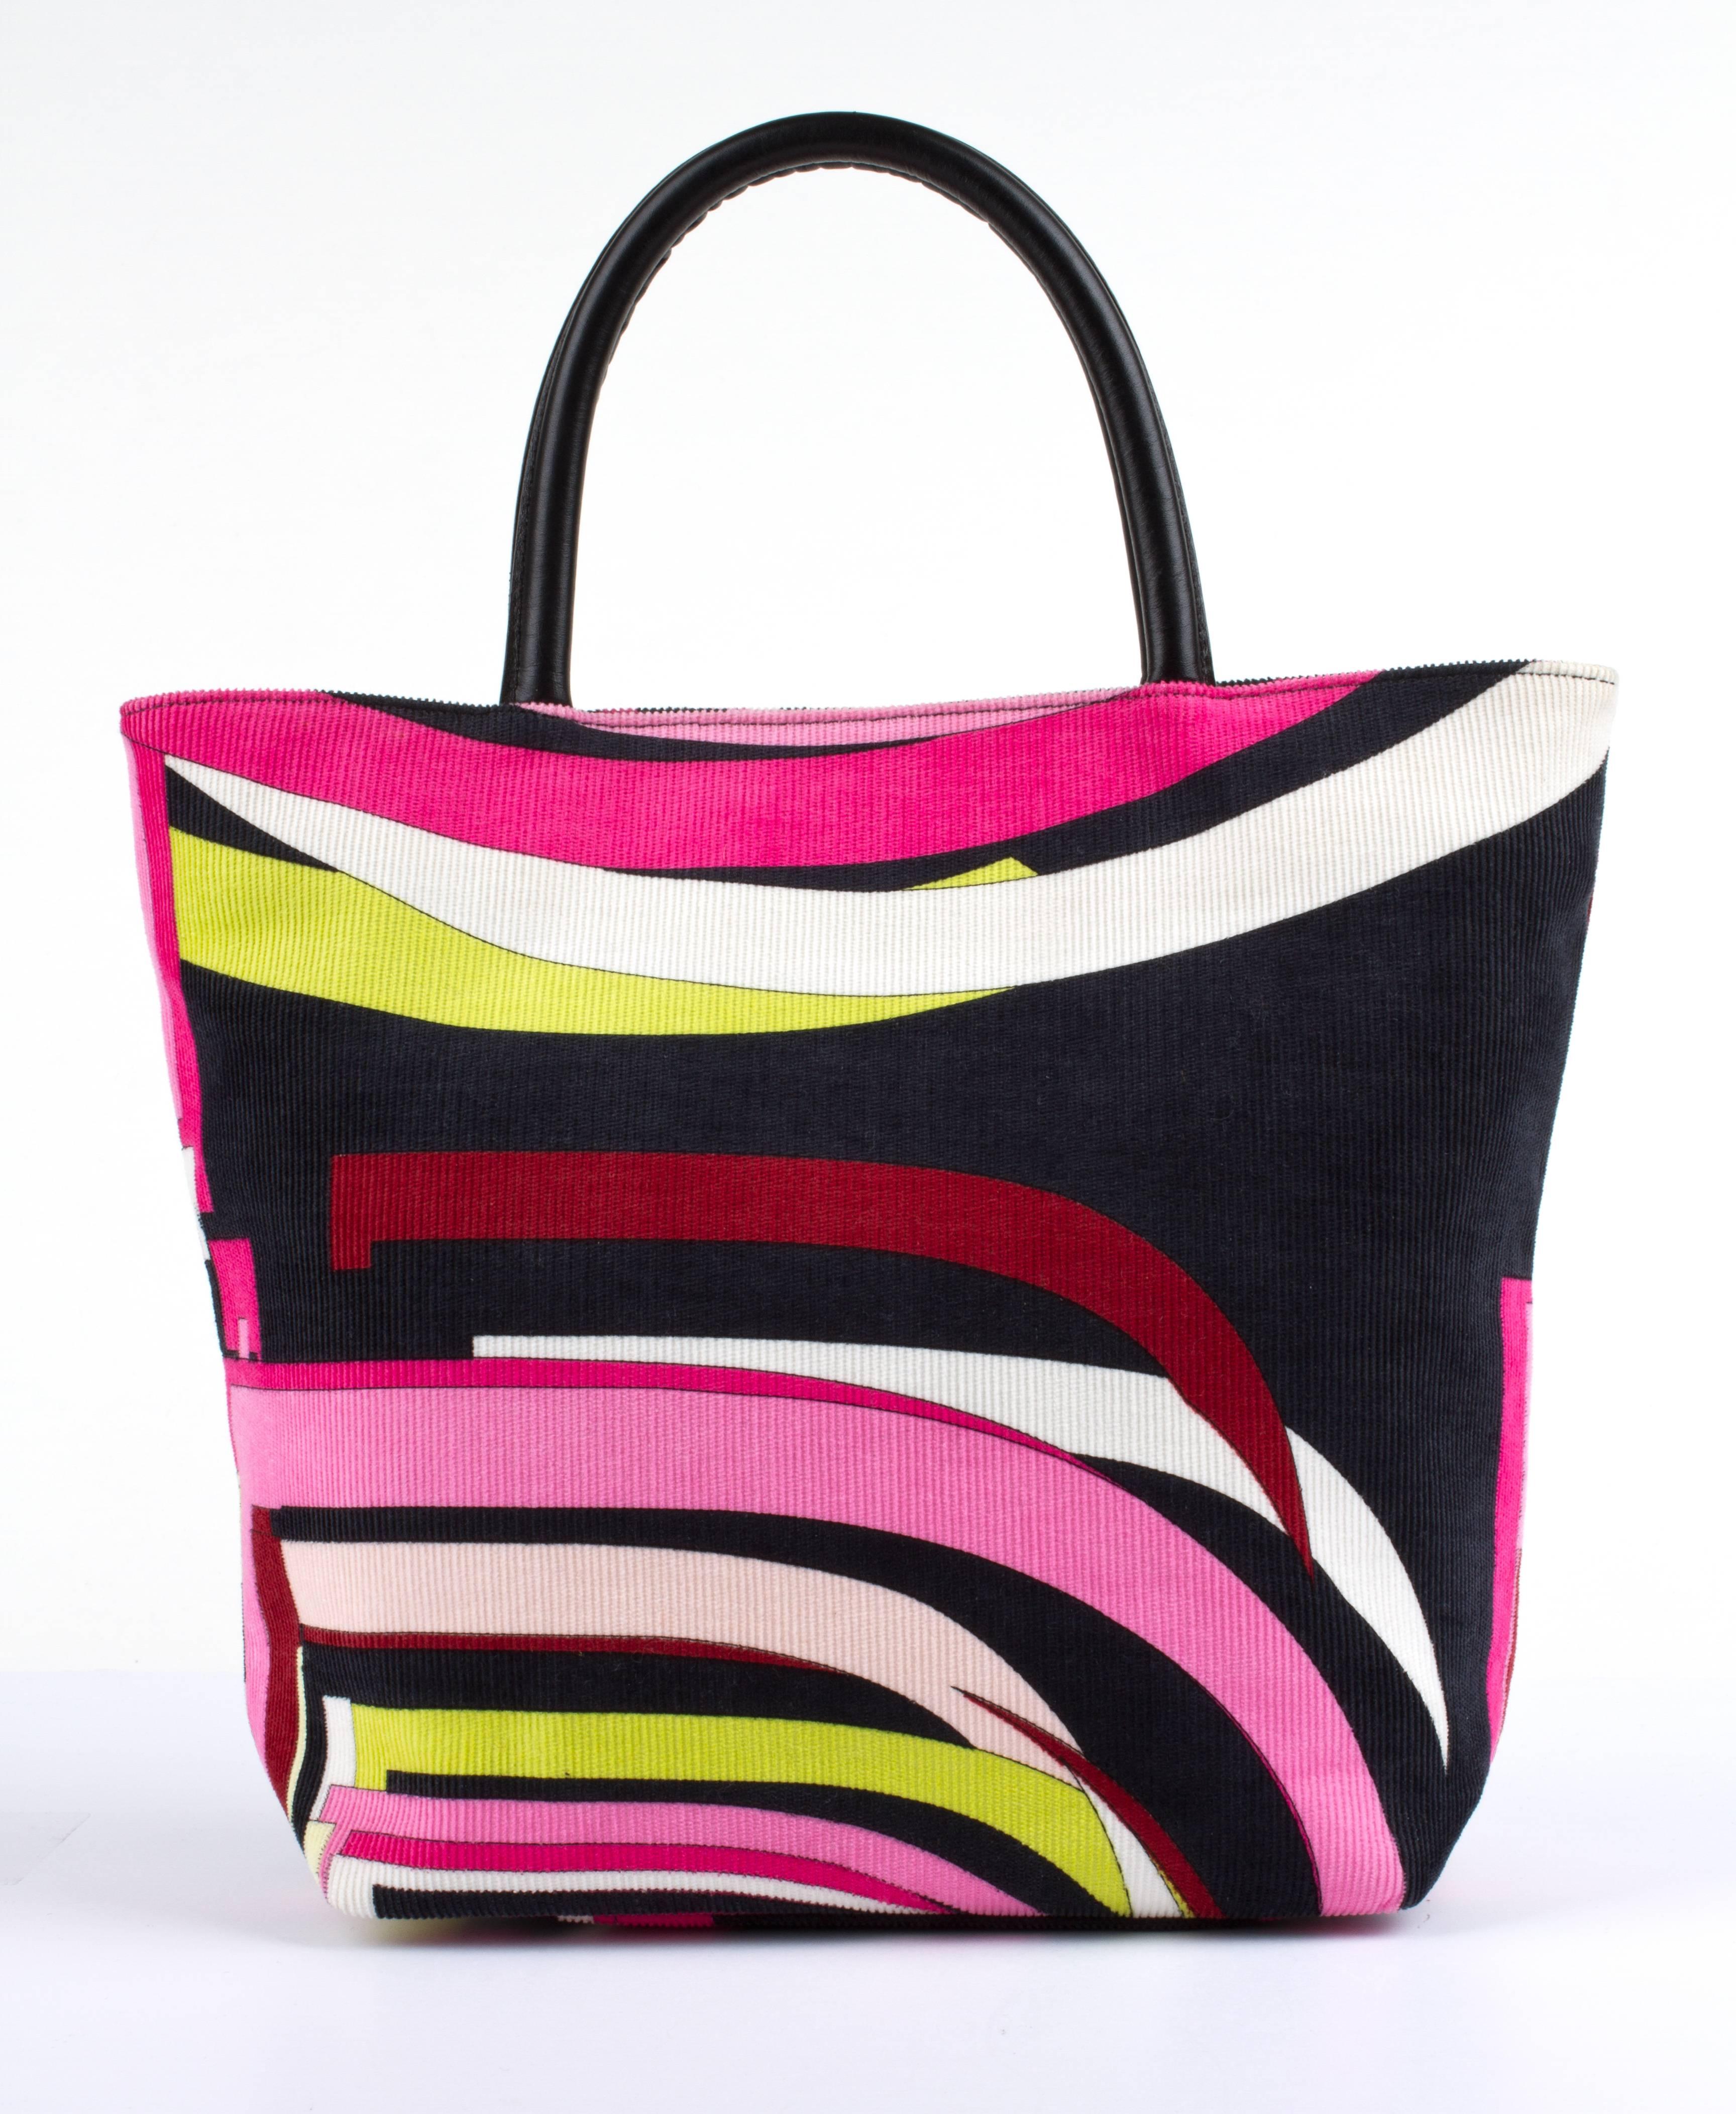 Emilio Pucci multi-color signature print corduroy handbag. Geometric op-art print fabric. Dual flat black leather feet and rolled top handles. Black synthetic lining with interior zip pocket and magnetic snap closure. 